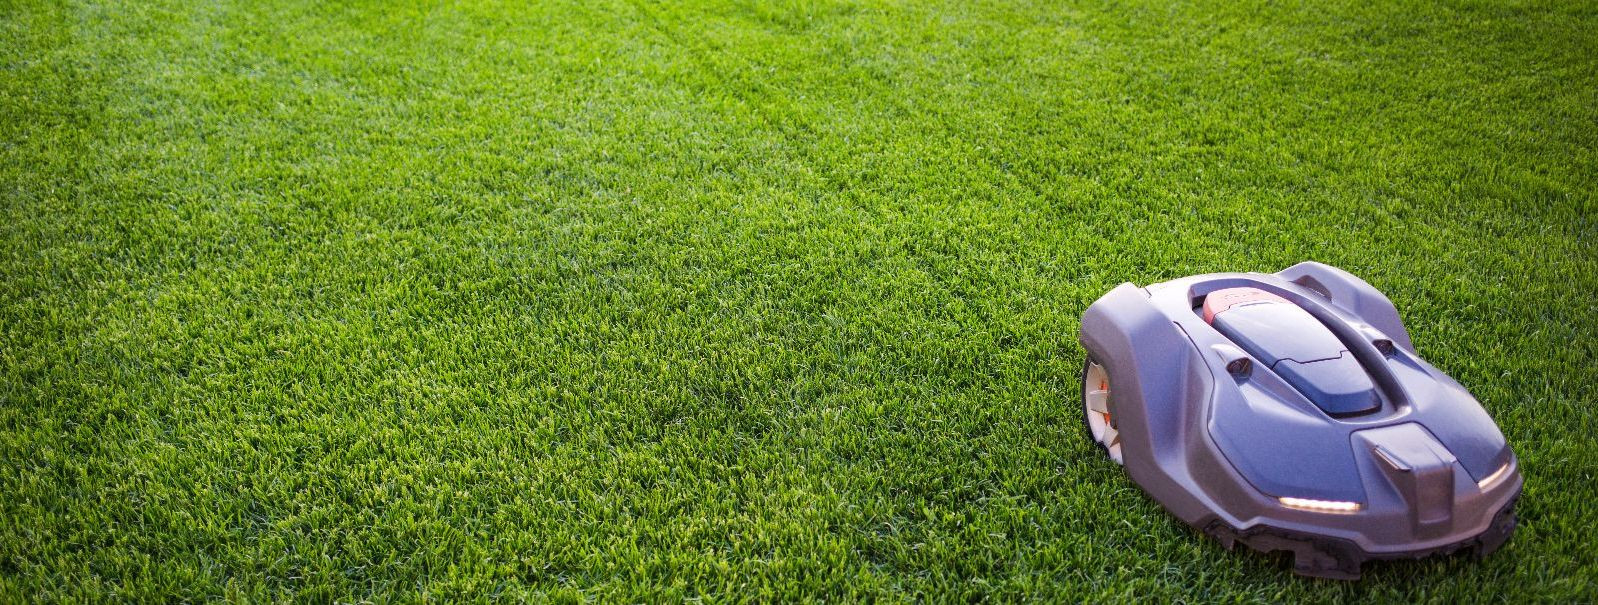 A well-maintained lawn is not only a testament to the beauty of nature but also serves as a functional space for outdoor activities. It reflects the care and at